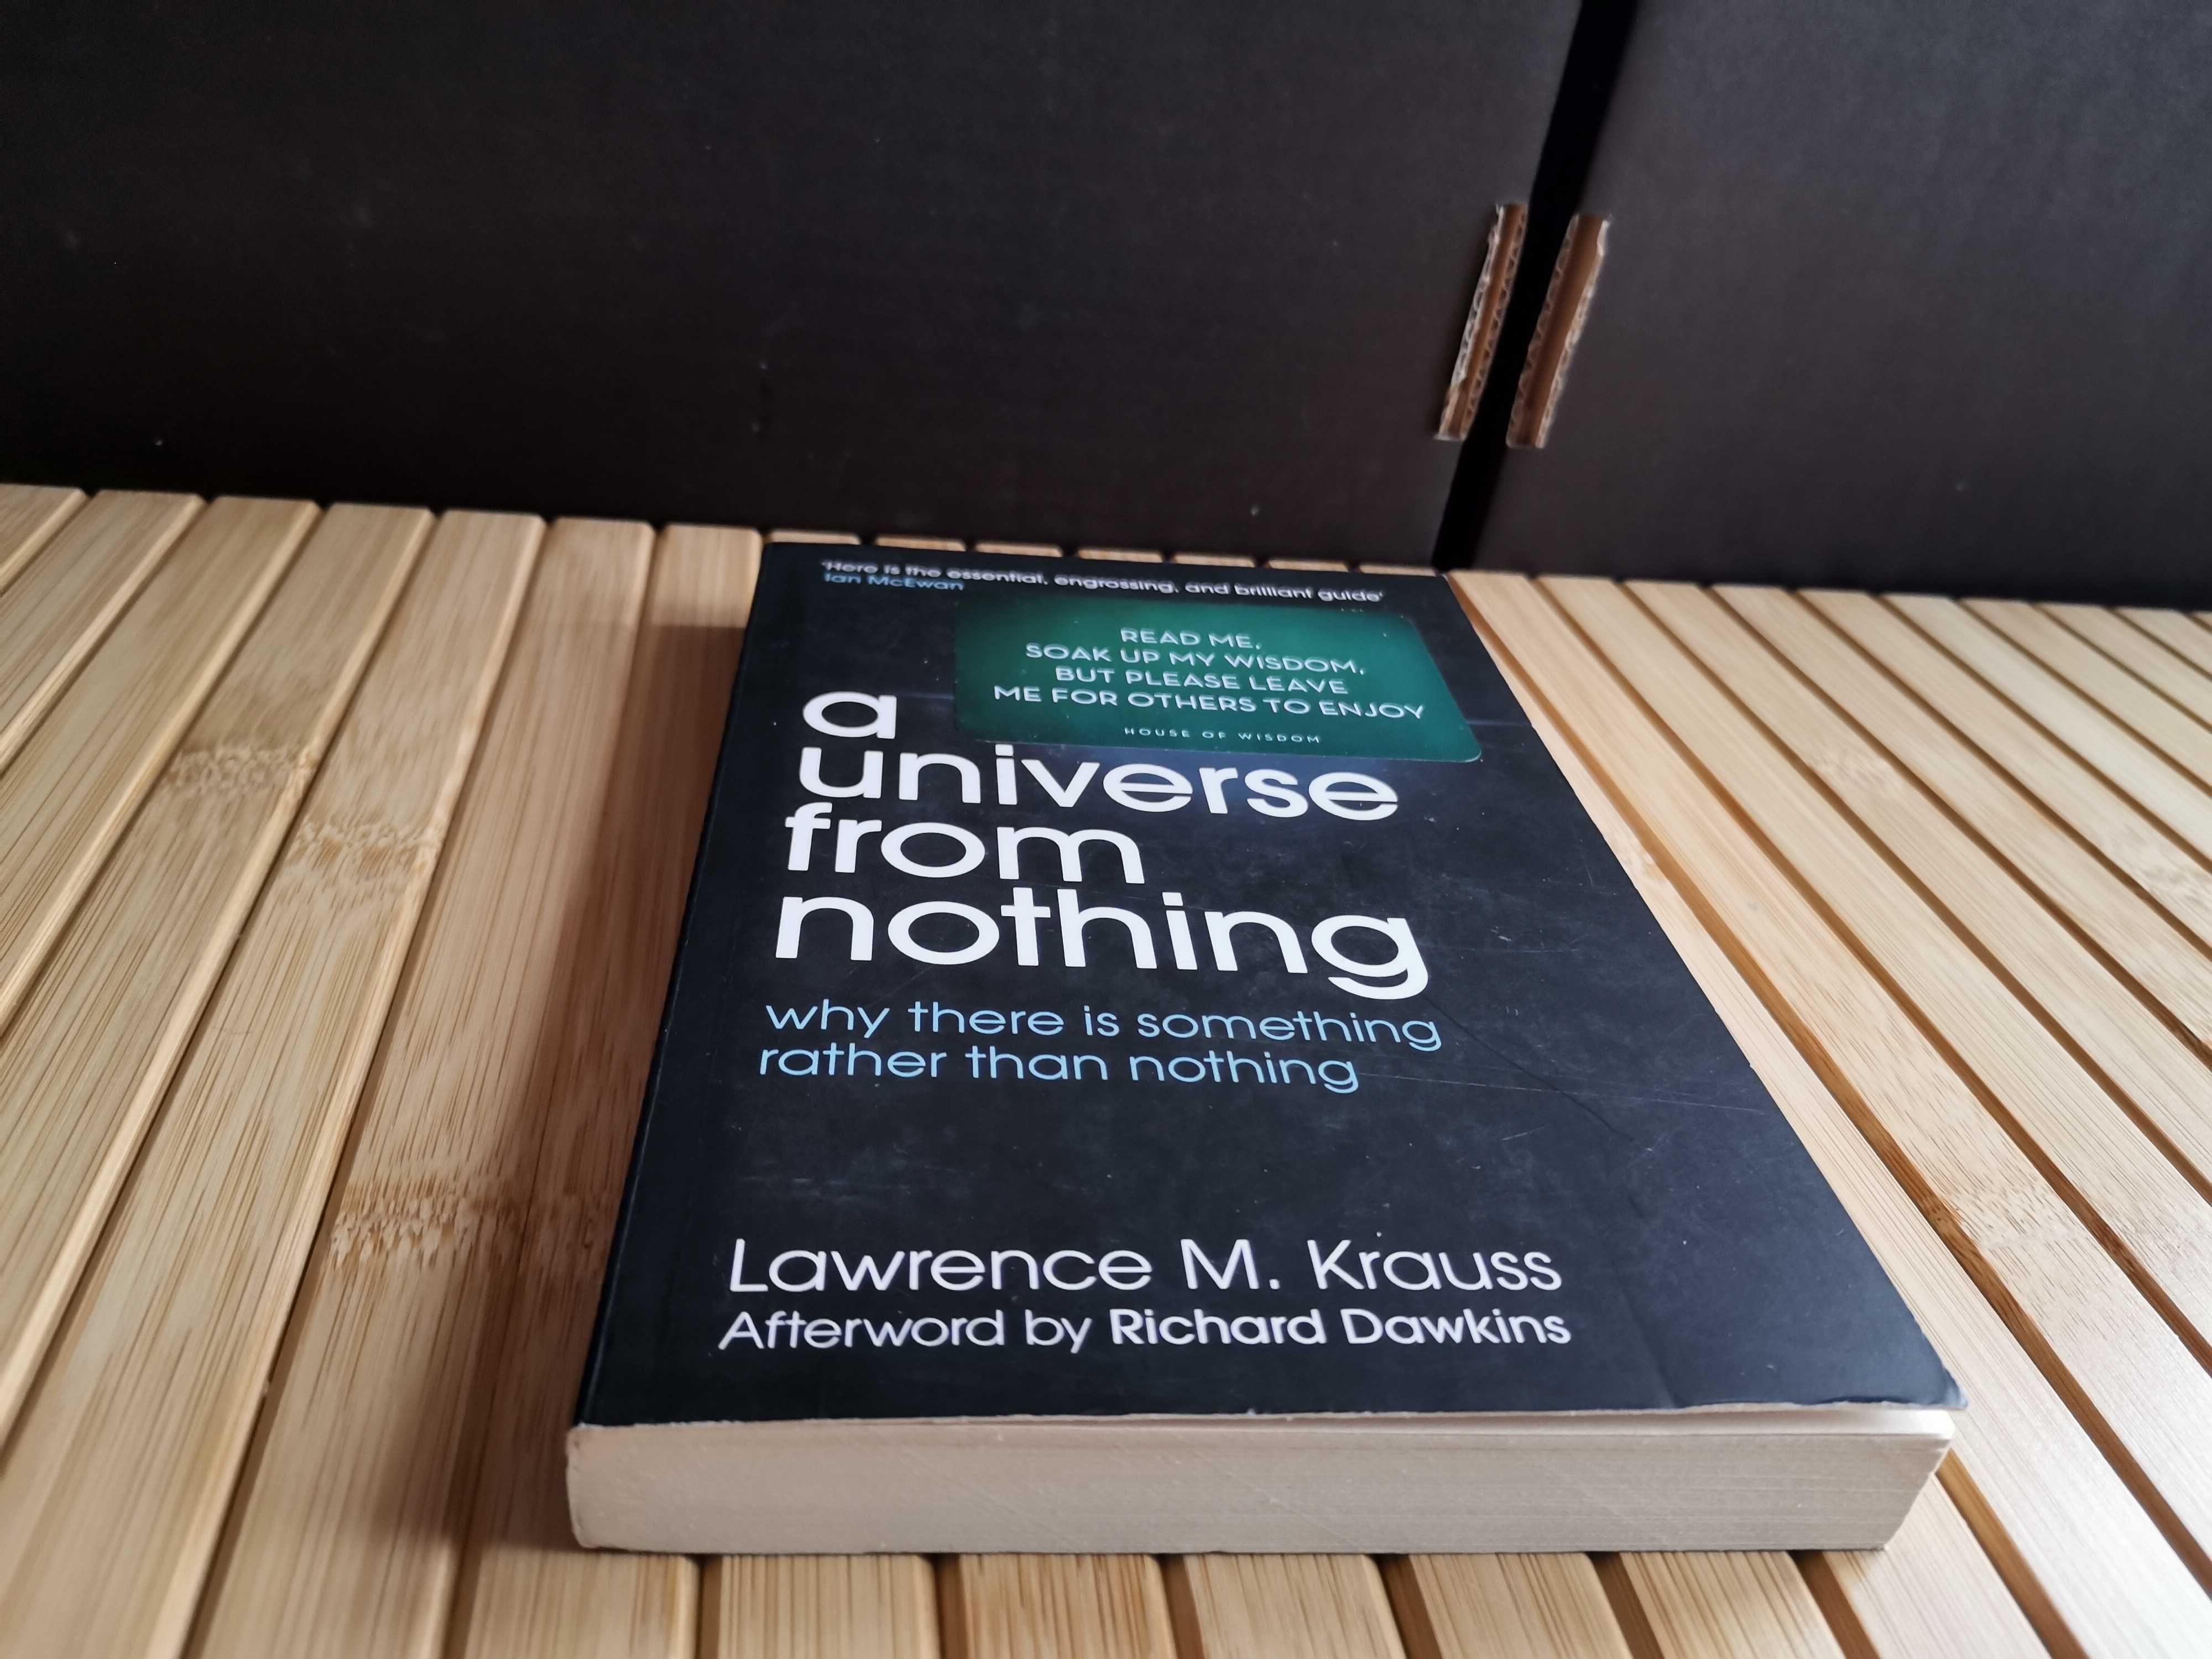 Krauss A universe from nothing Real foto